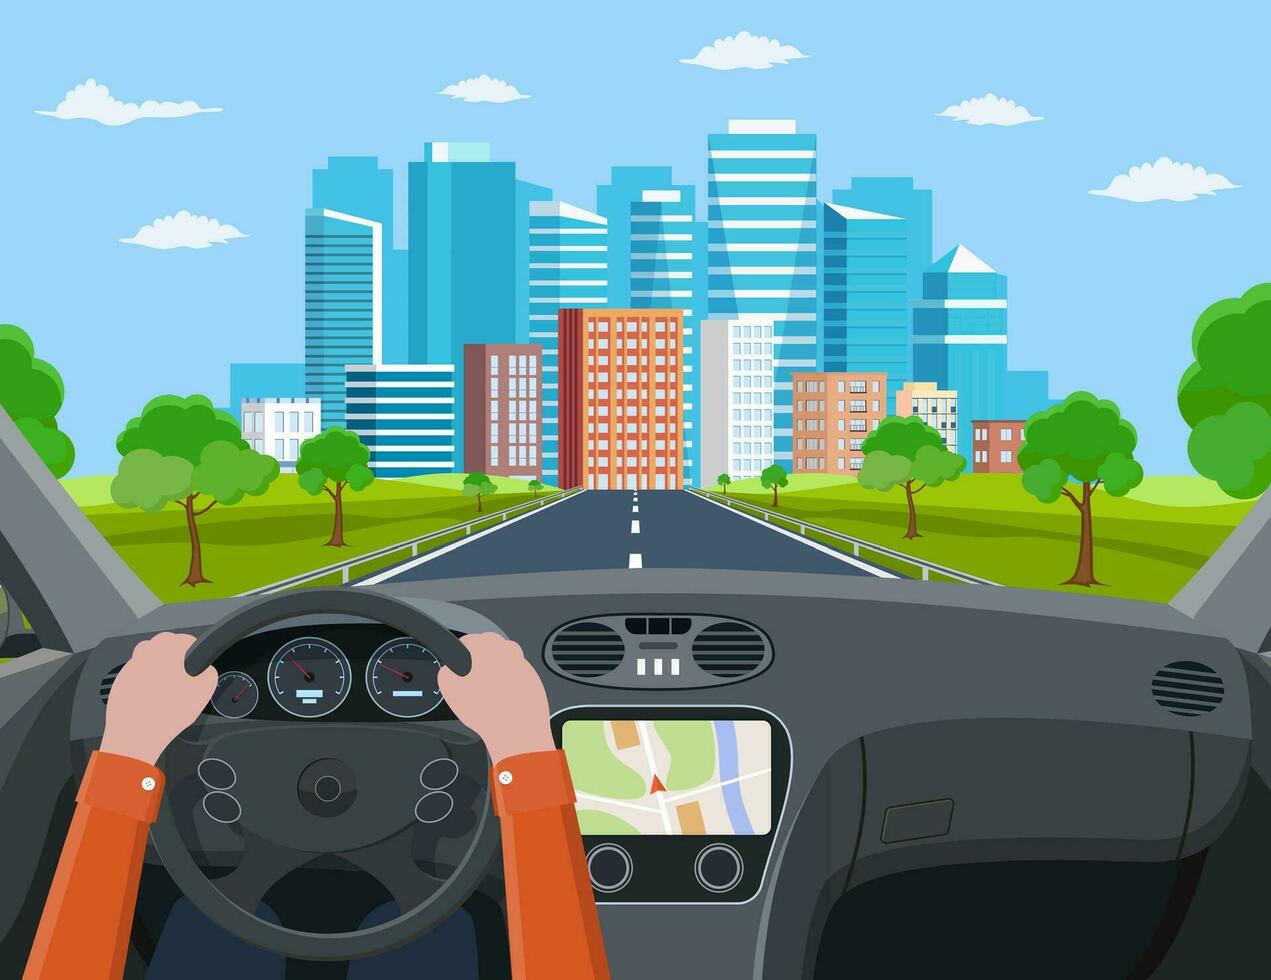 View of the road from the car interior. Road way to city buildings on horizon. Hands on Steering Wheel, inside car driver. modern big skyscrapers town far away ahead. Vector illustration in flat style